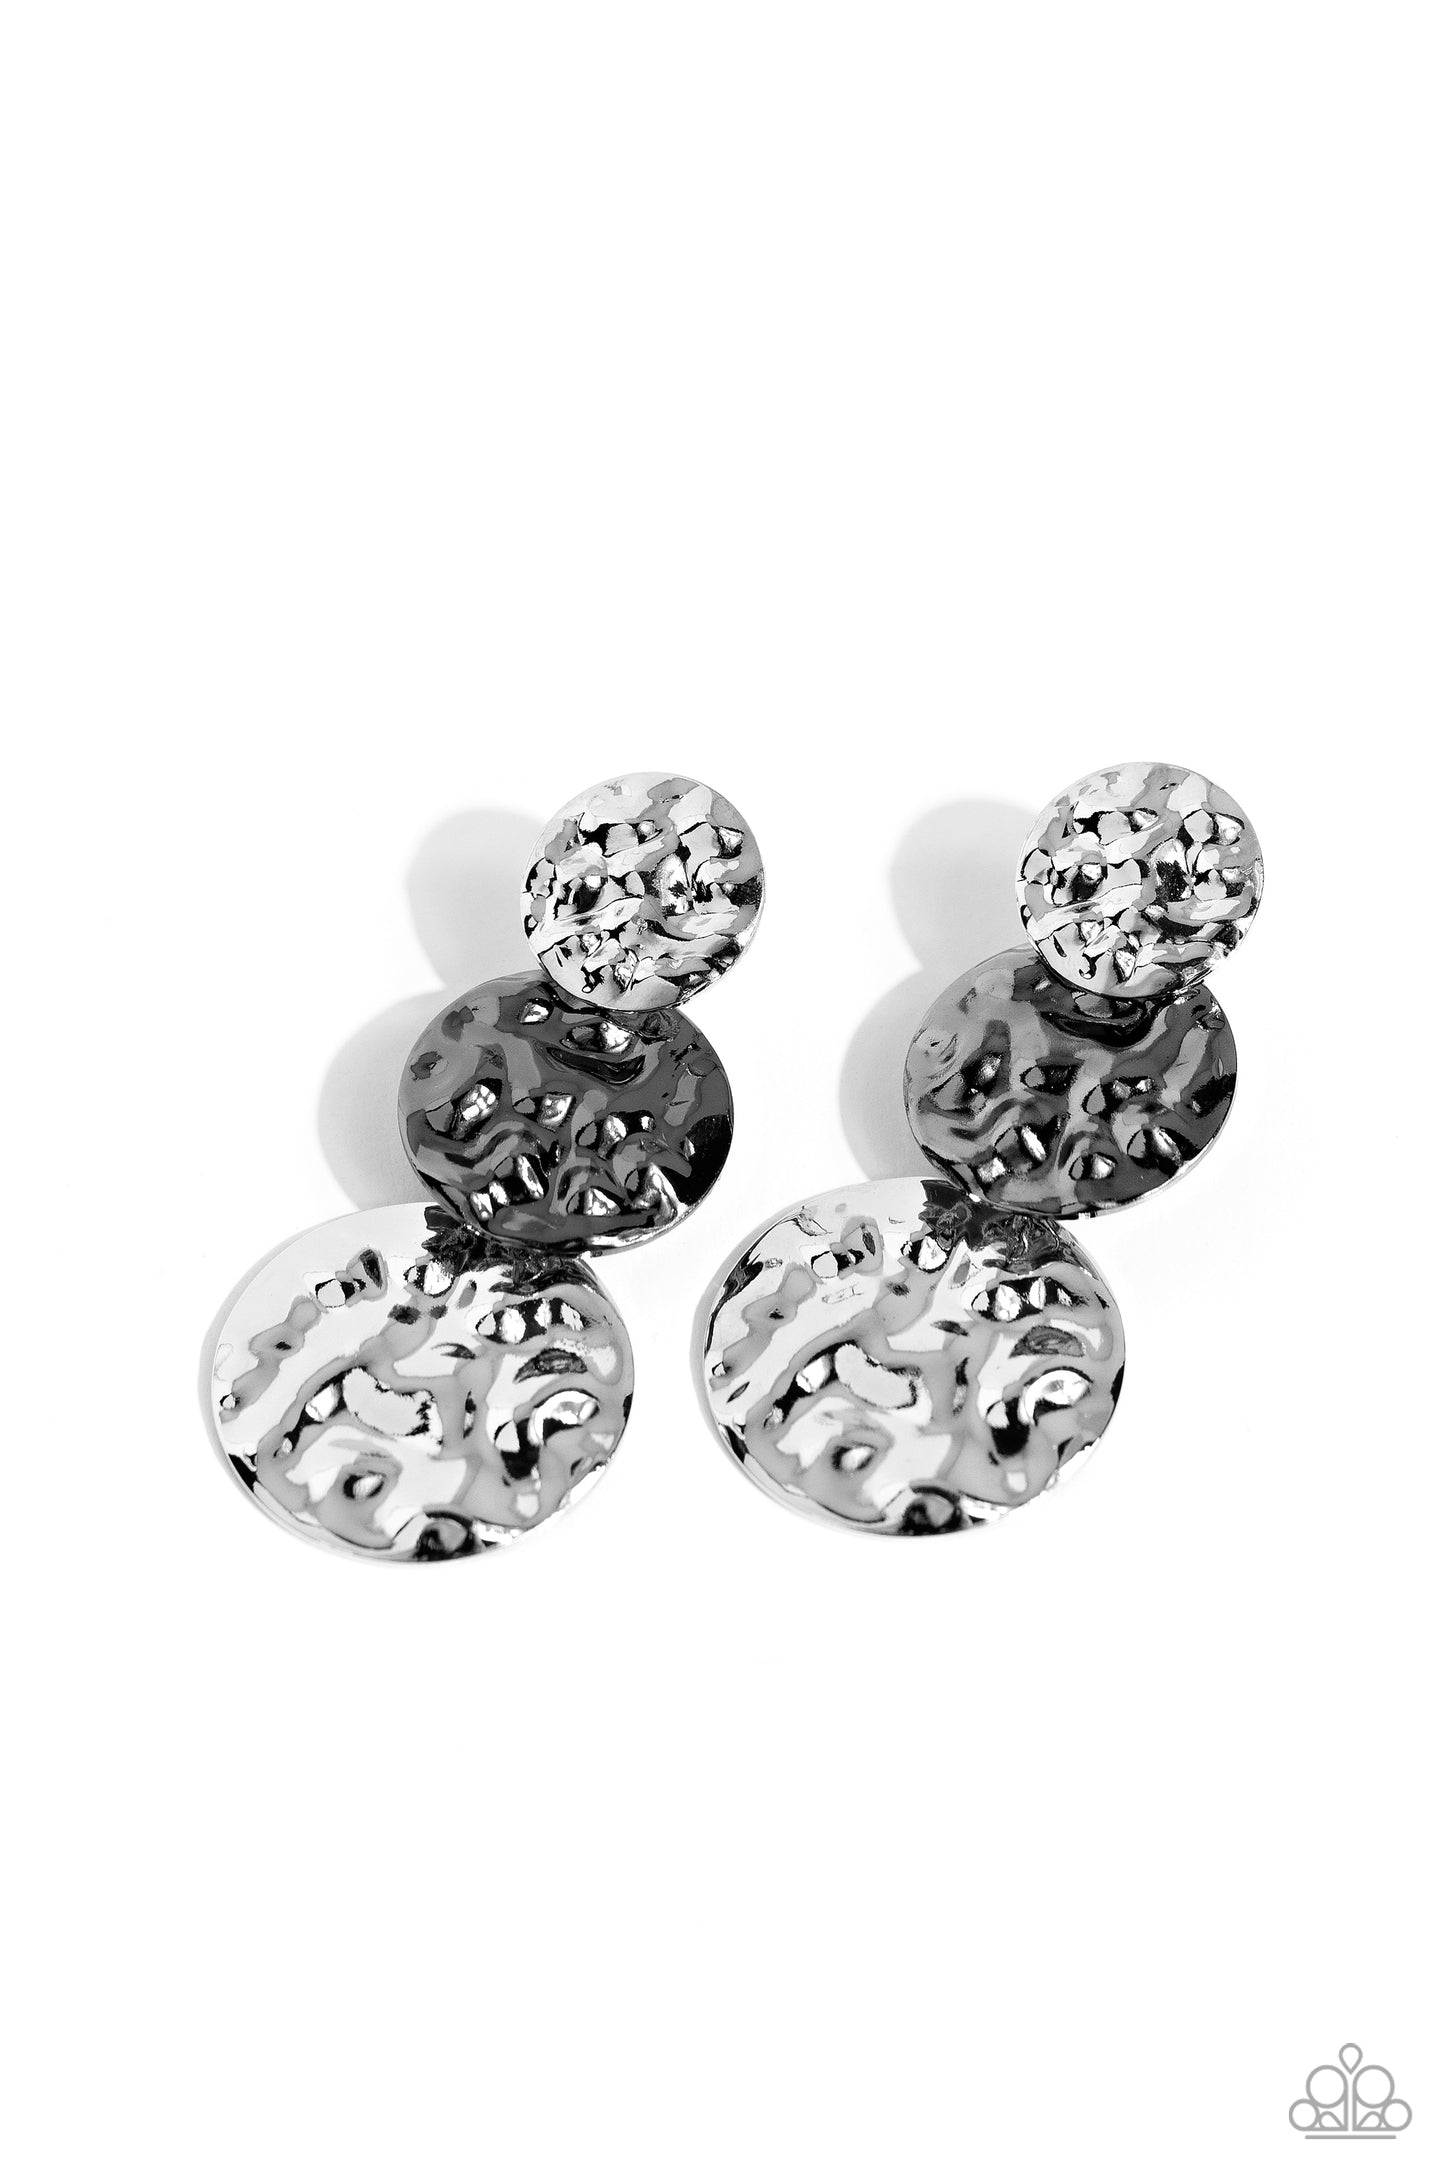 Triple Threat Texture Multi Post Earring - Paparazzi Accessories  Gradually increasing in size, heavily hammered silver and gunmetal discs delicately link and overlap into an intense industrial display. Earring attaches to a standard post fitting.  Sold as one pair of post earrings.  Sku:  P5PO-MTXX-060XX